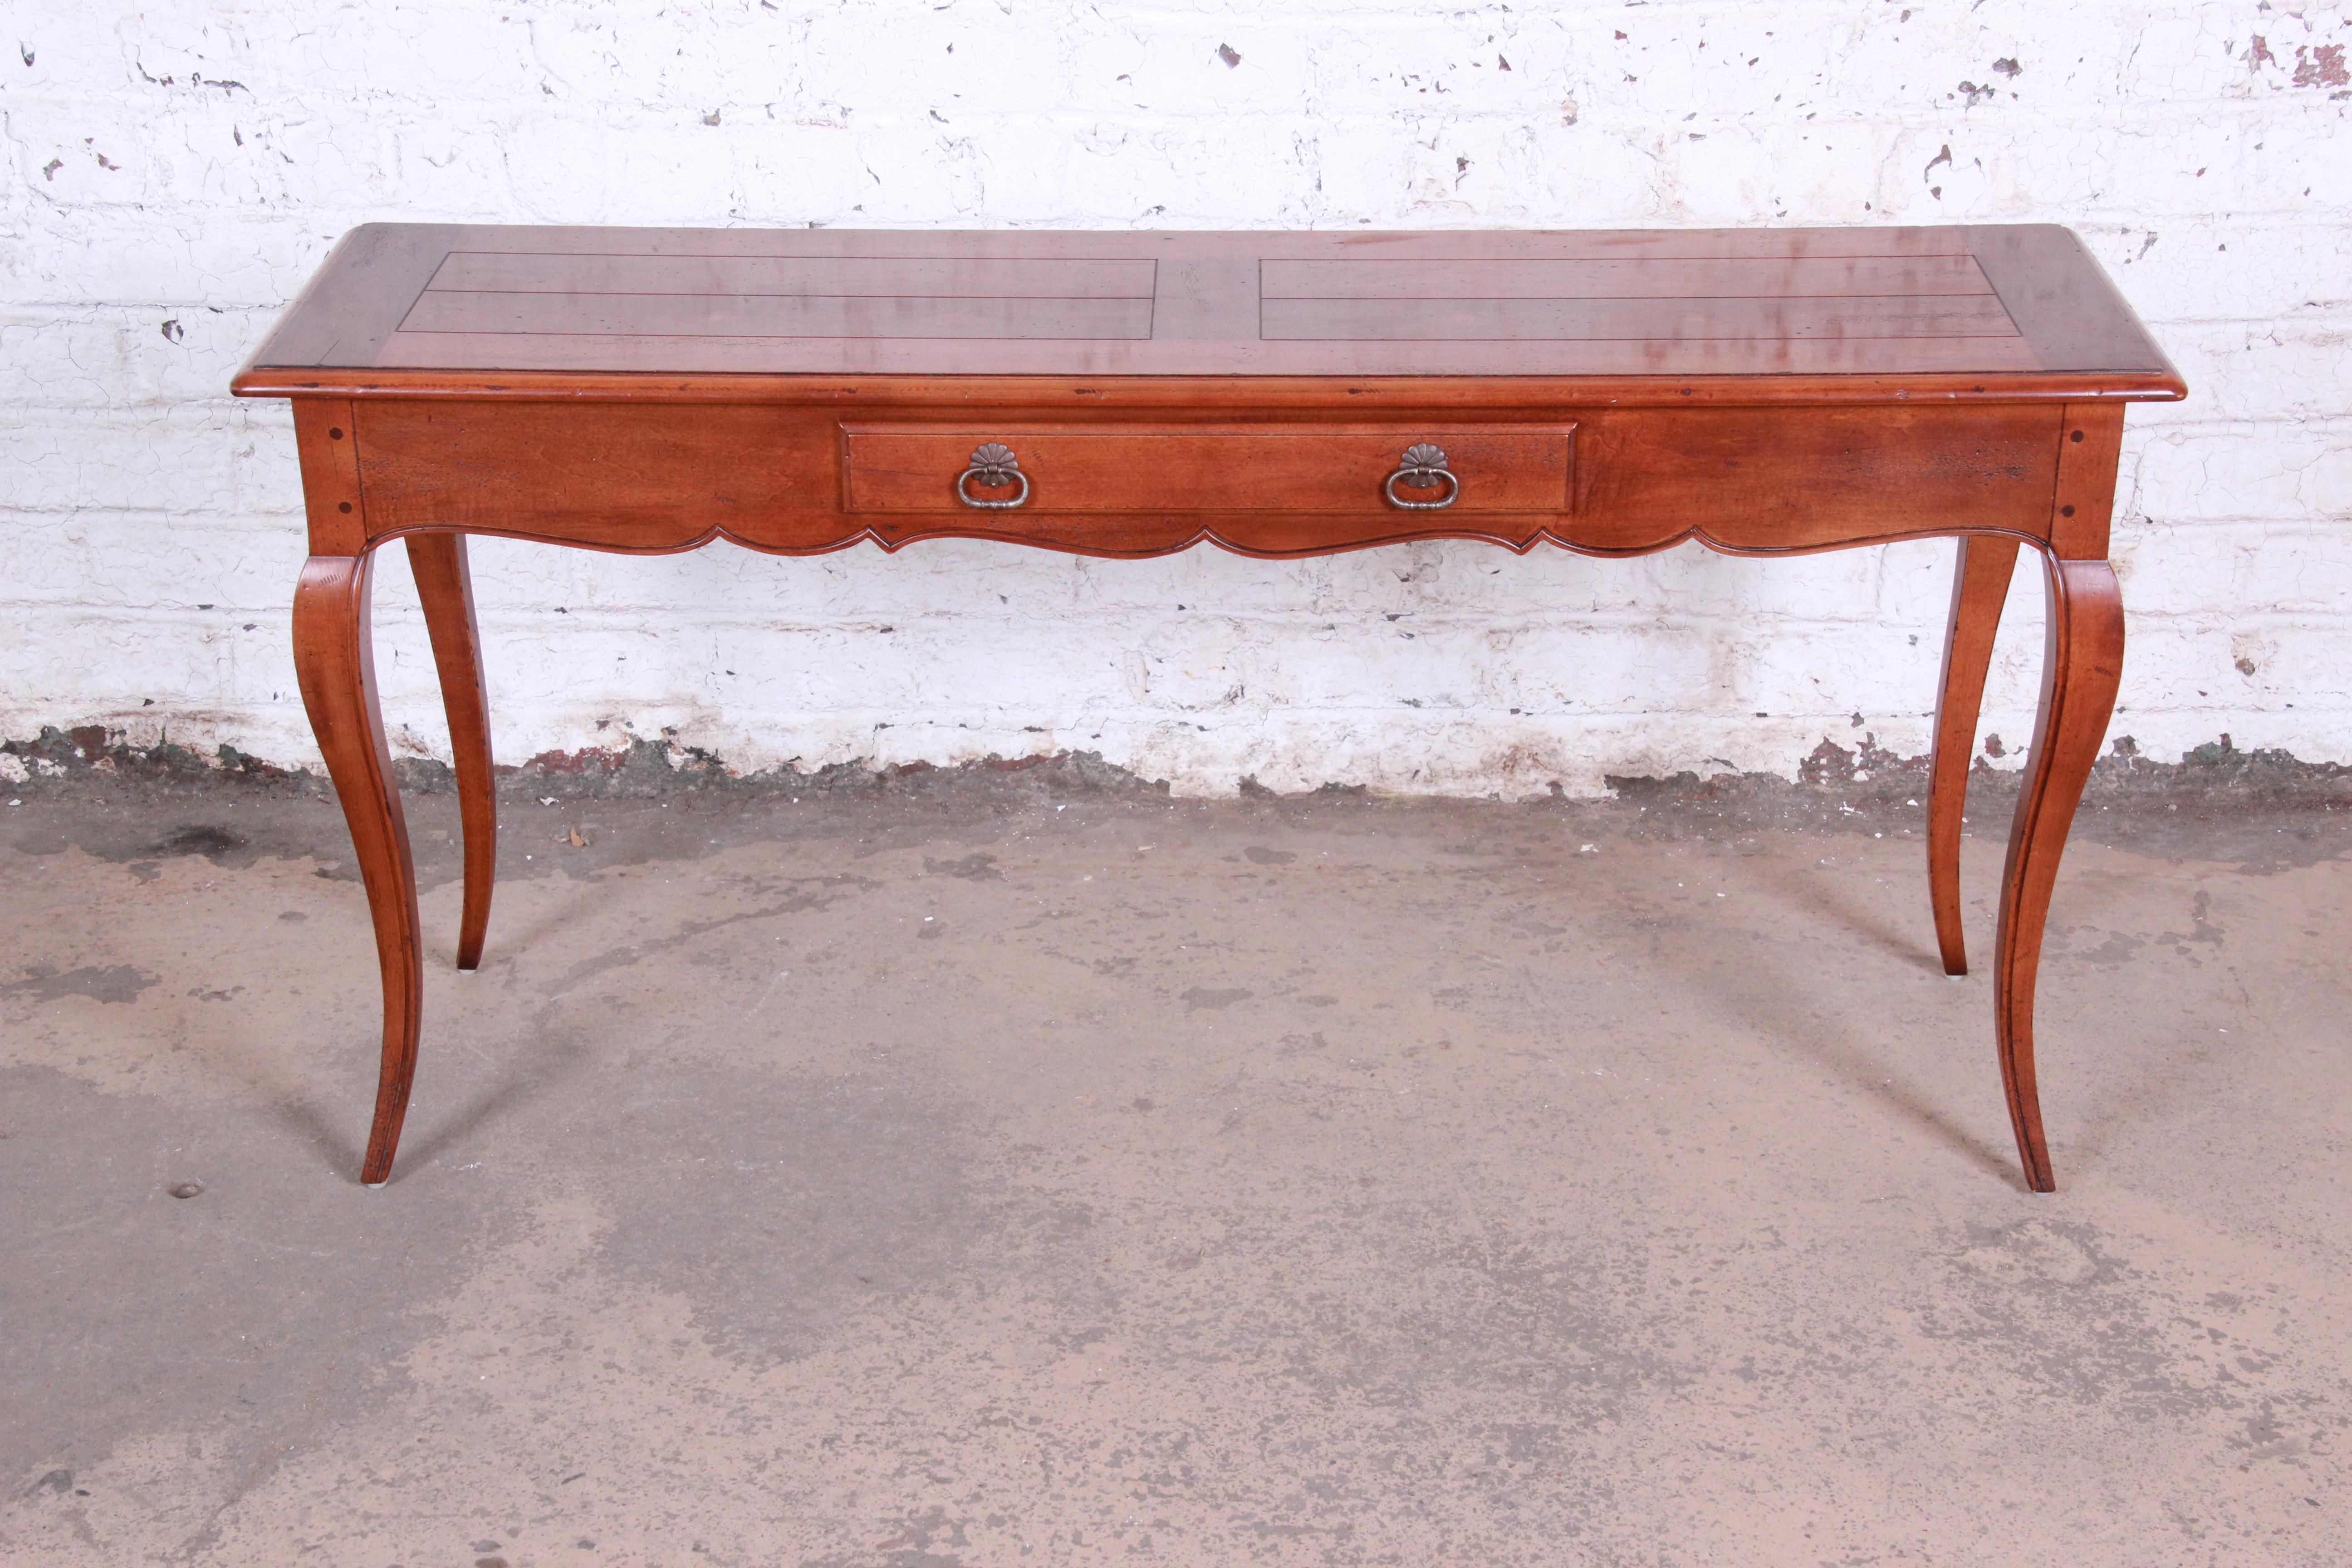 A gorgeous French Provincial Louis XV style console or sofa table by Henredon. The table features solid cherry wood construction with beautiful wood grain and tall cabriole legs. It has a single drawer for storage, and the original Henredon label is